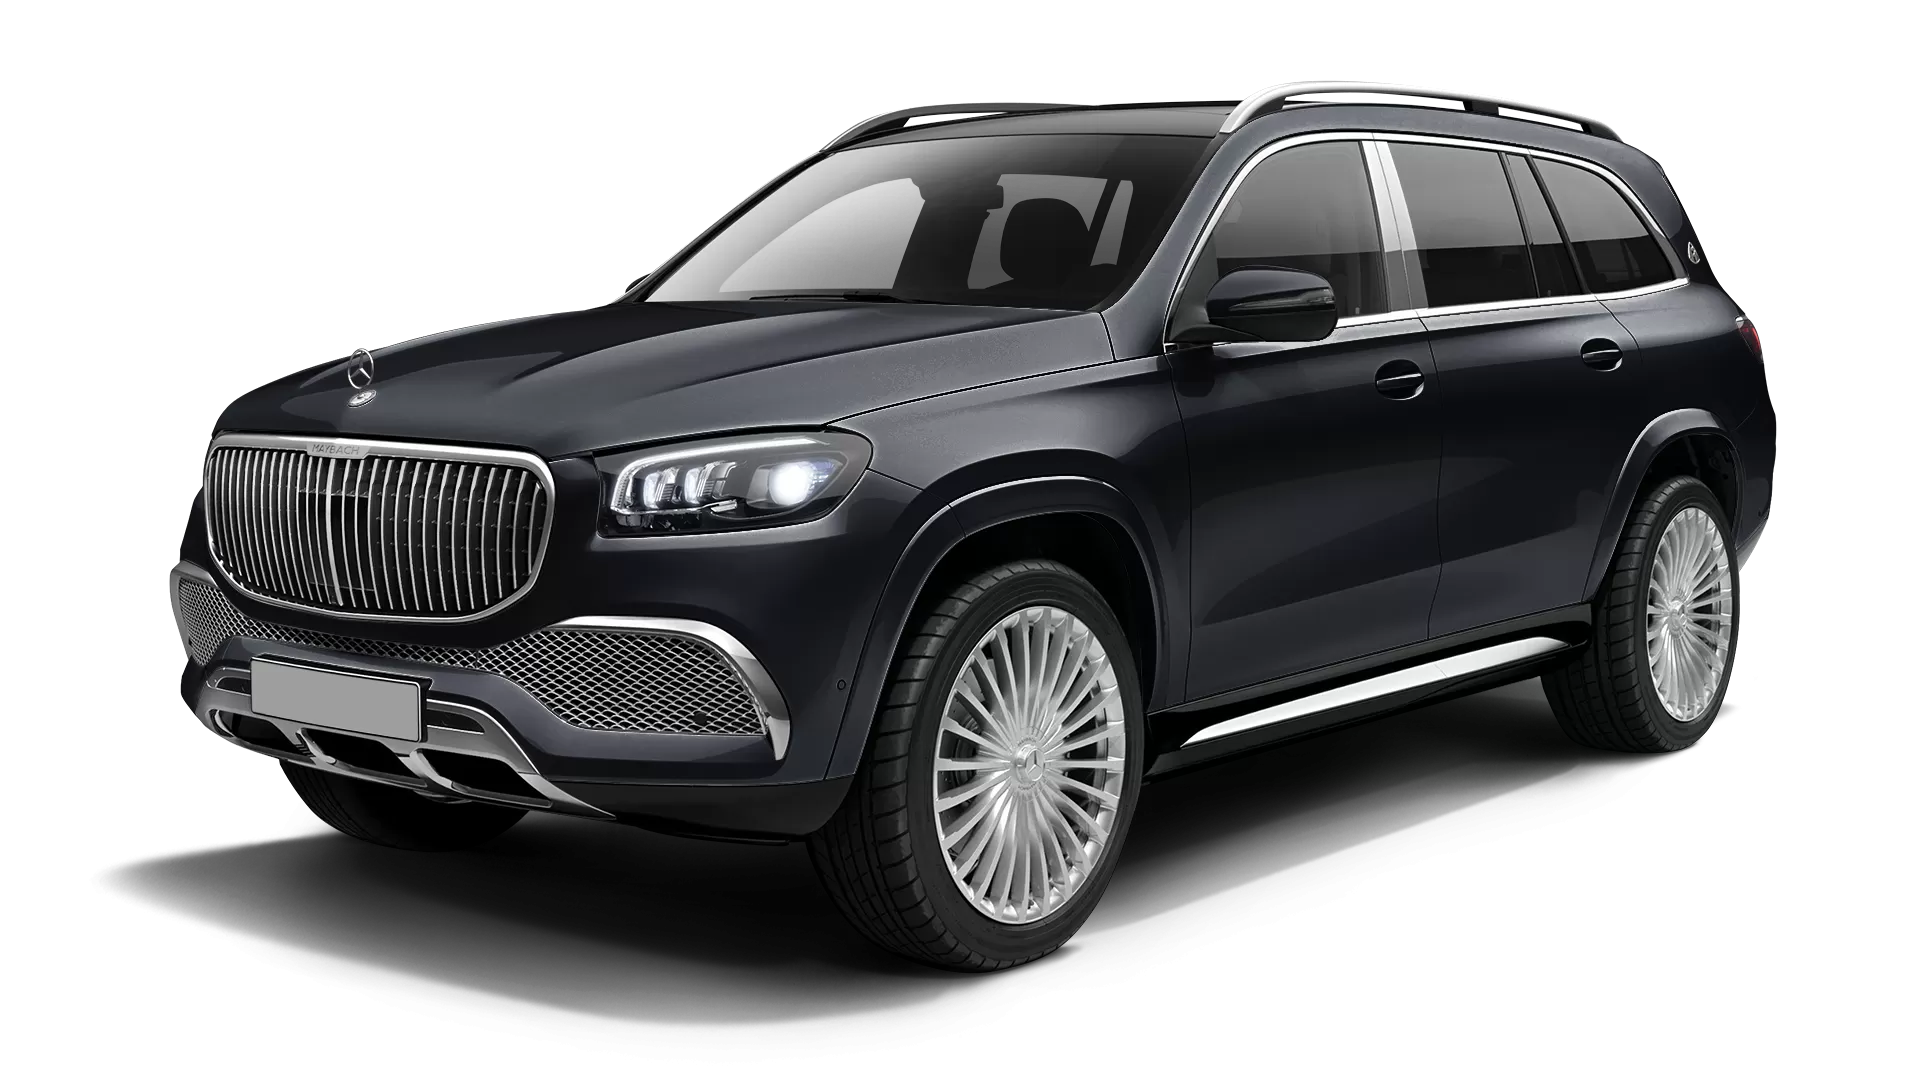 Mercedes Maybach GLS 600 stock front view in Obsidian Black (Non Metallic) color